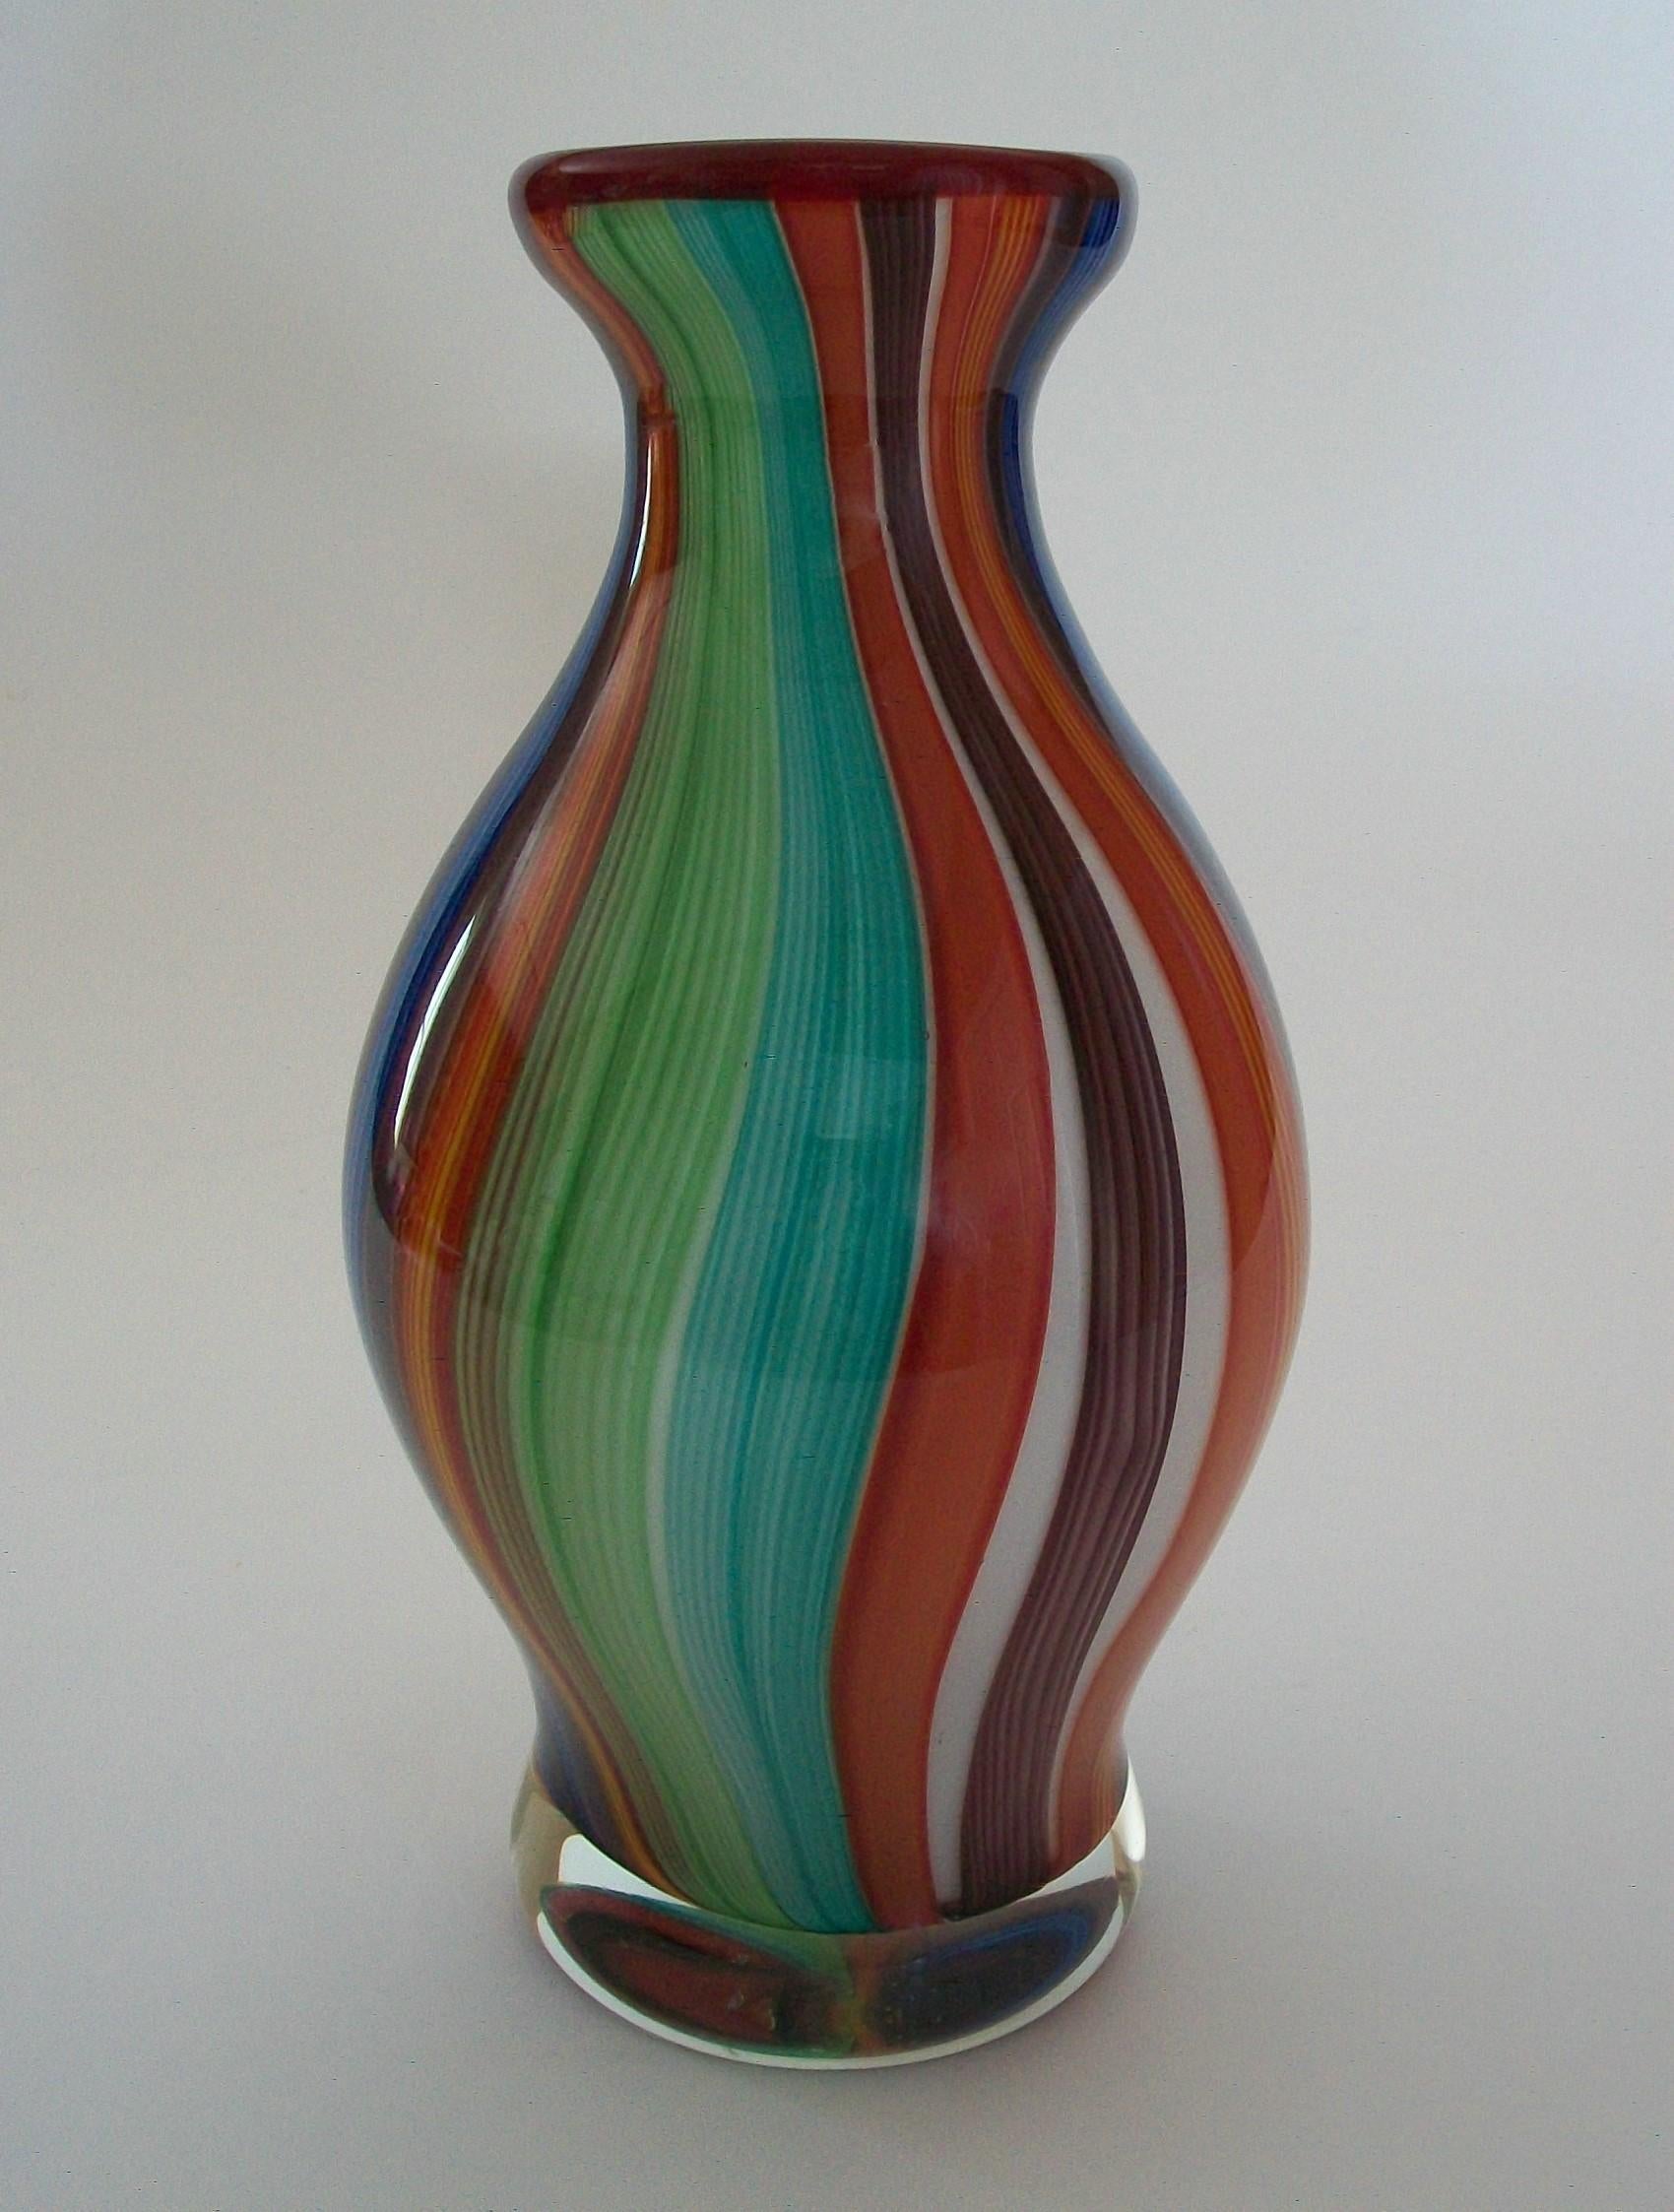 Large vintage multicolor Murano glass vase - featuring a white glass interior with red rim - clear cased glass to the outside and base - unsigned - Italy - late 20th century.

Excellent vintage condition - no loss - no damage - no restoration -